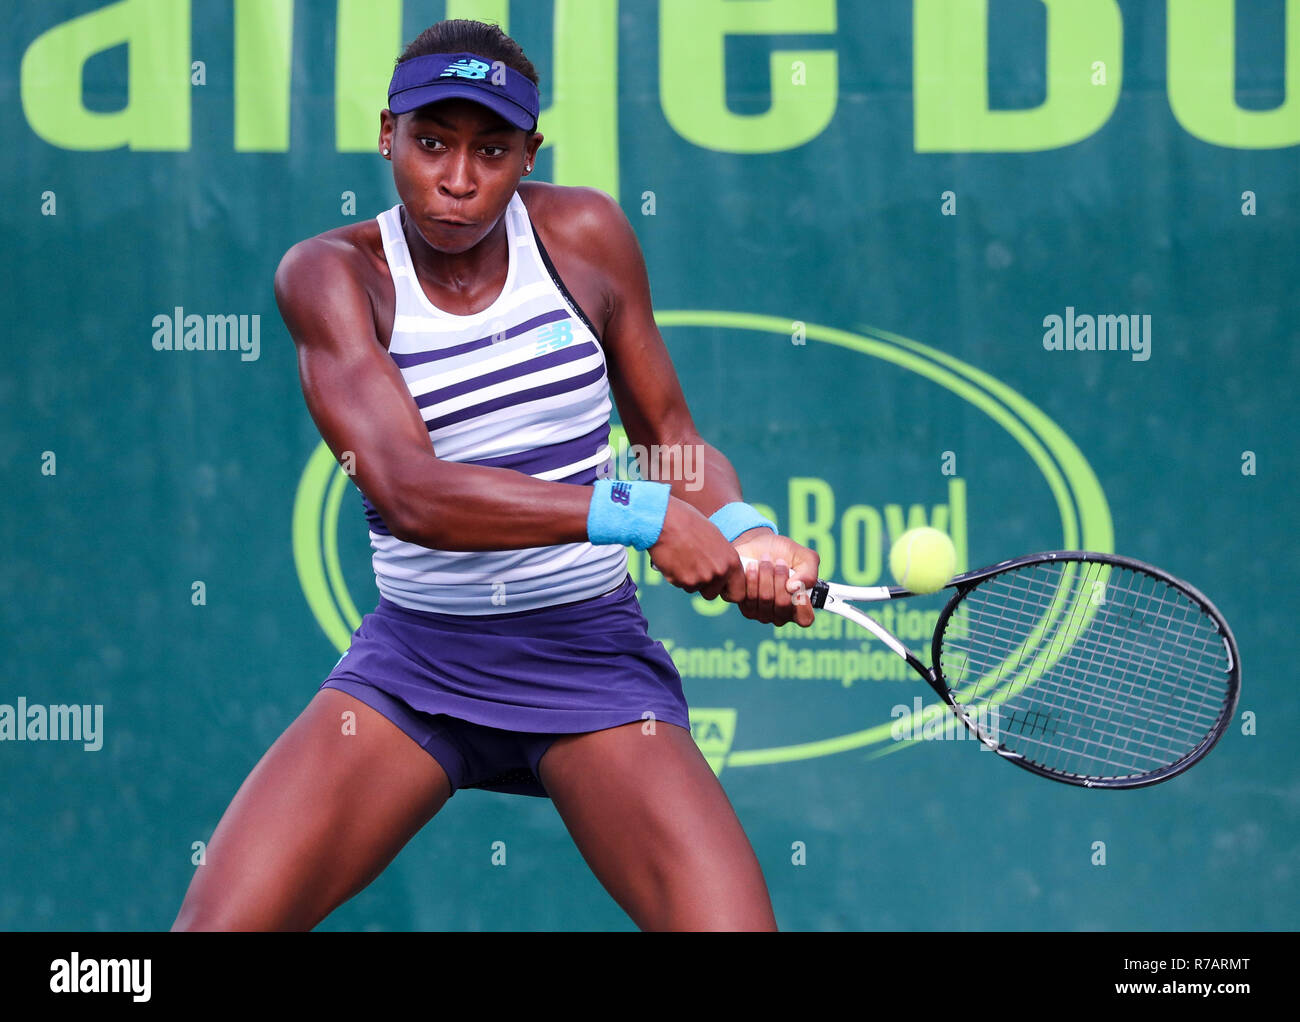 Plantation, Florida, USA. 08th Dec, 2018. Cori Gauff, from the USA, plays in the GS18 ...